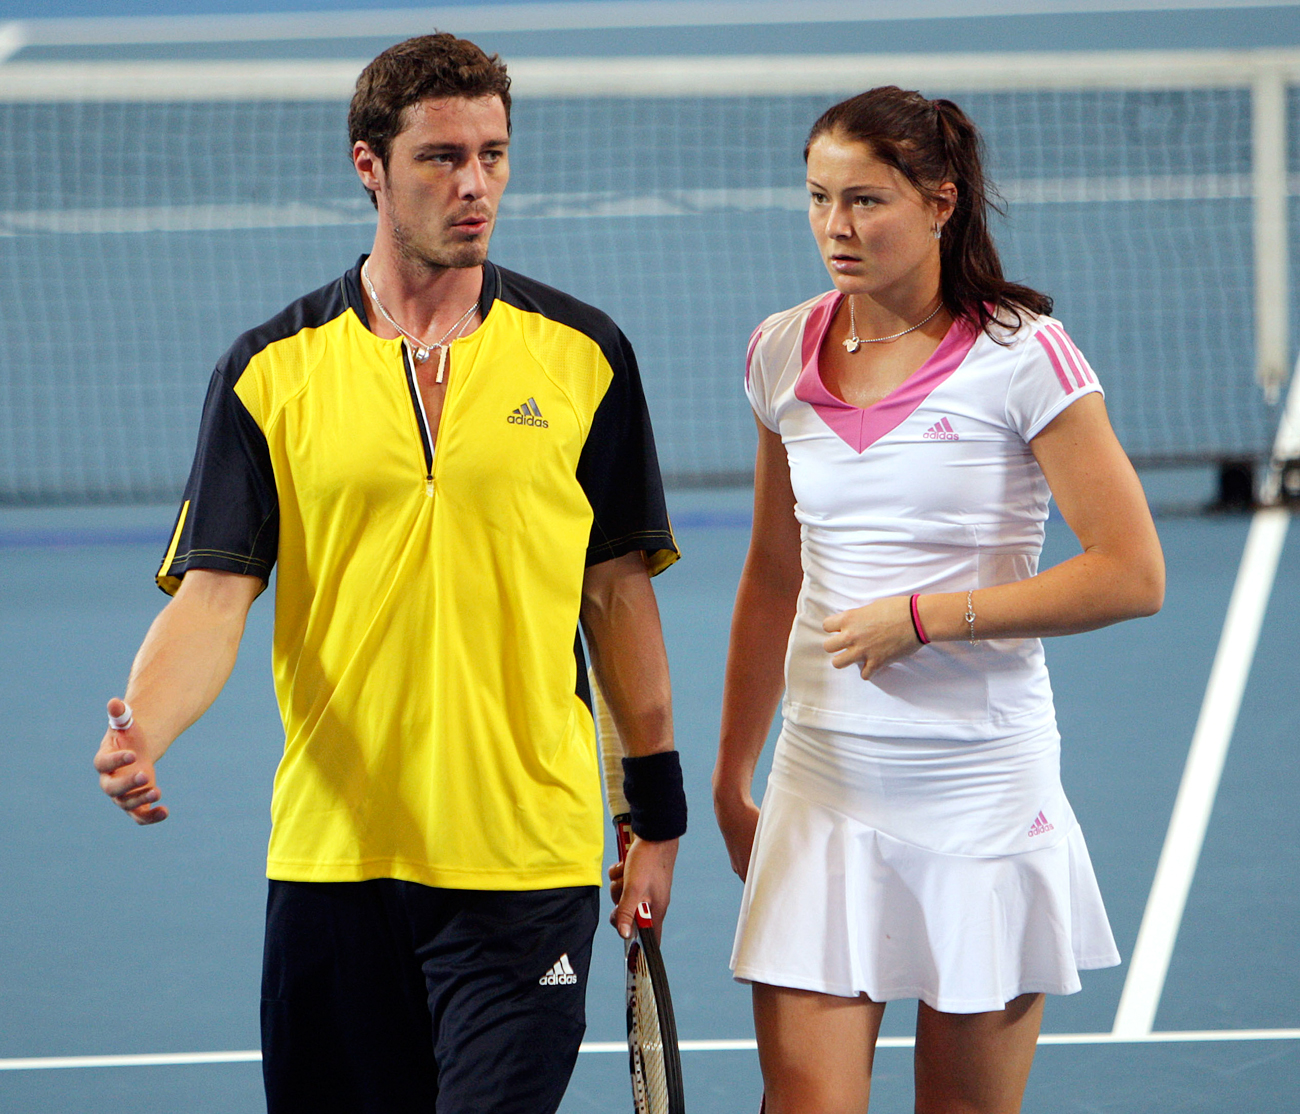 Russia&#39s Marat Safin and his sister Dinara Safina talk during their doubles match against Italy&#39s Simone Bolelli and Flavia Pennetta at the Hopman Cup in Perth, Western Australia, Jan. 4, 2009.